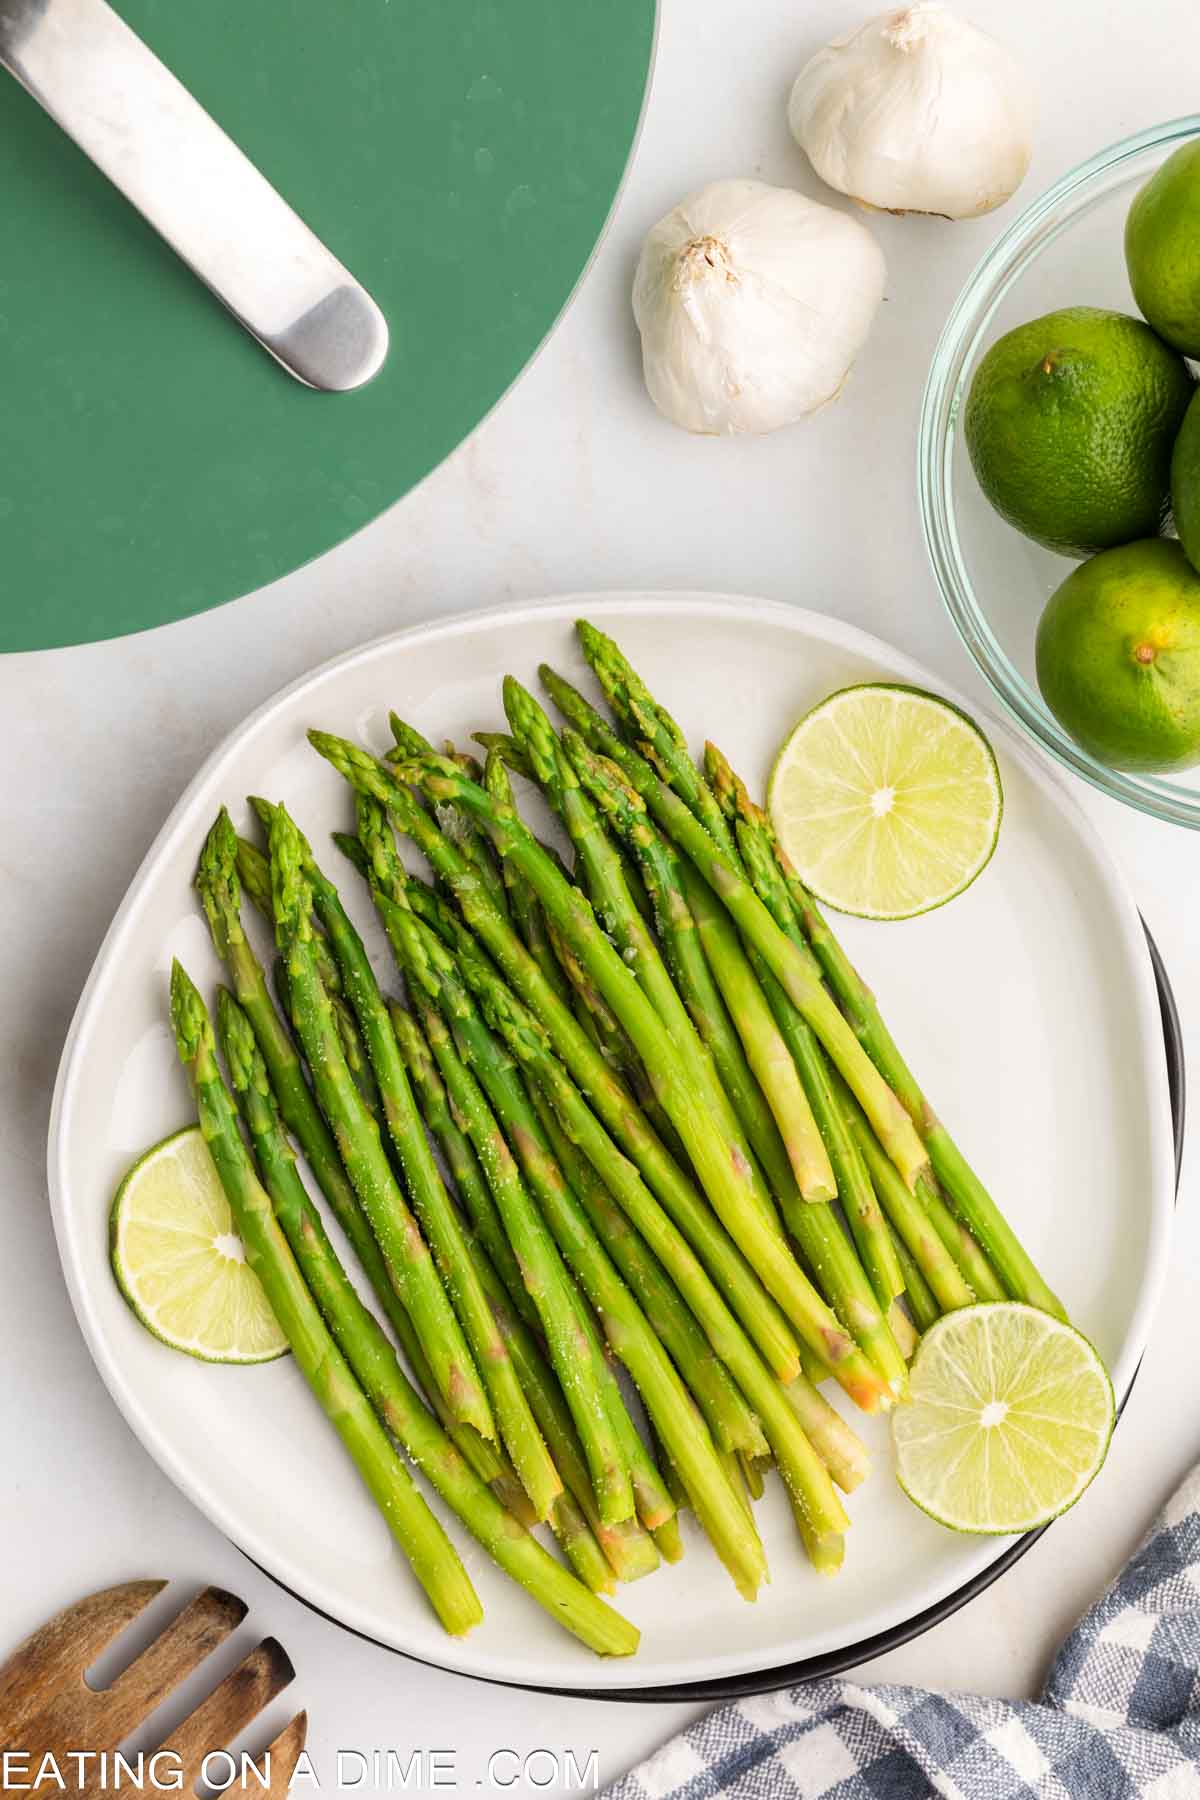 Steamed asparagus on a plate with fresh limes